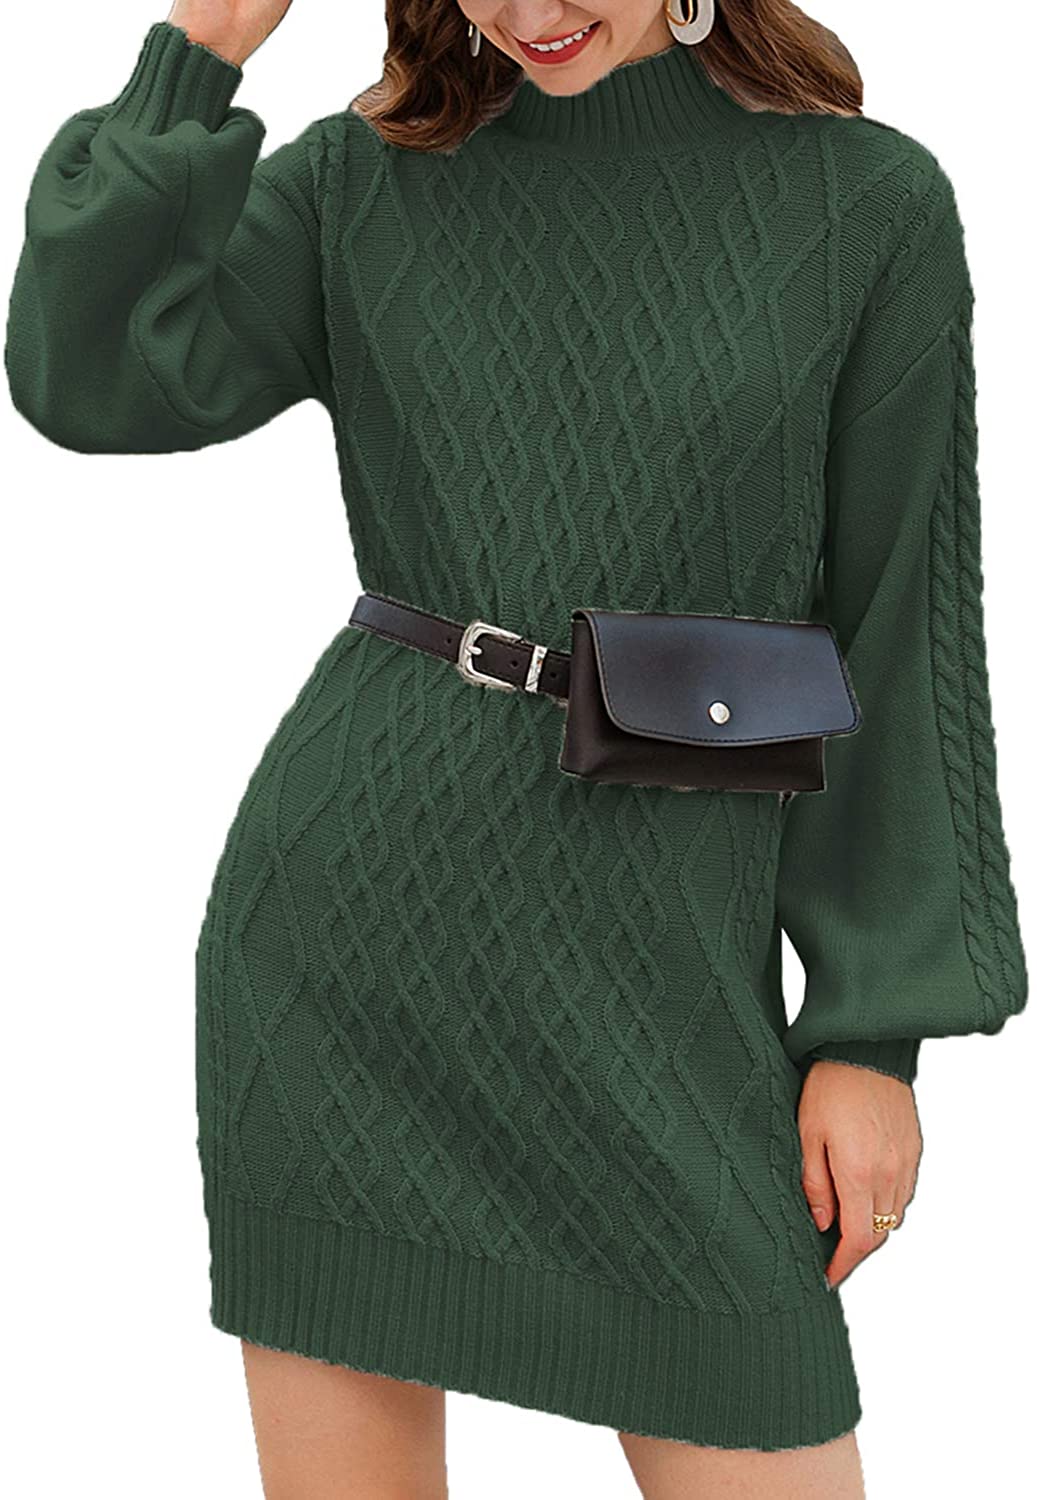 Simplee Women's Long Sleeve Bodycon Sweater Dress Cable Knit